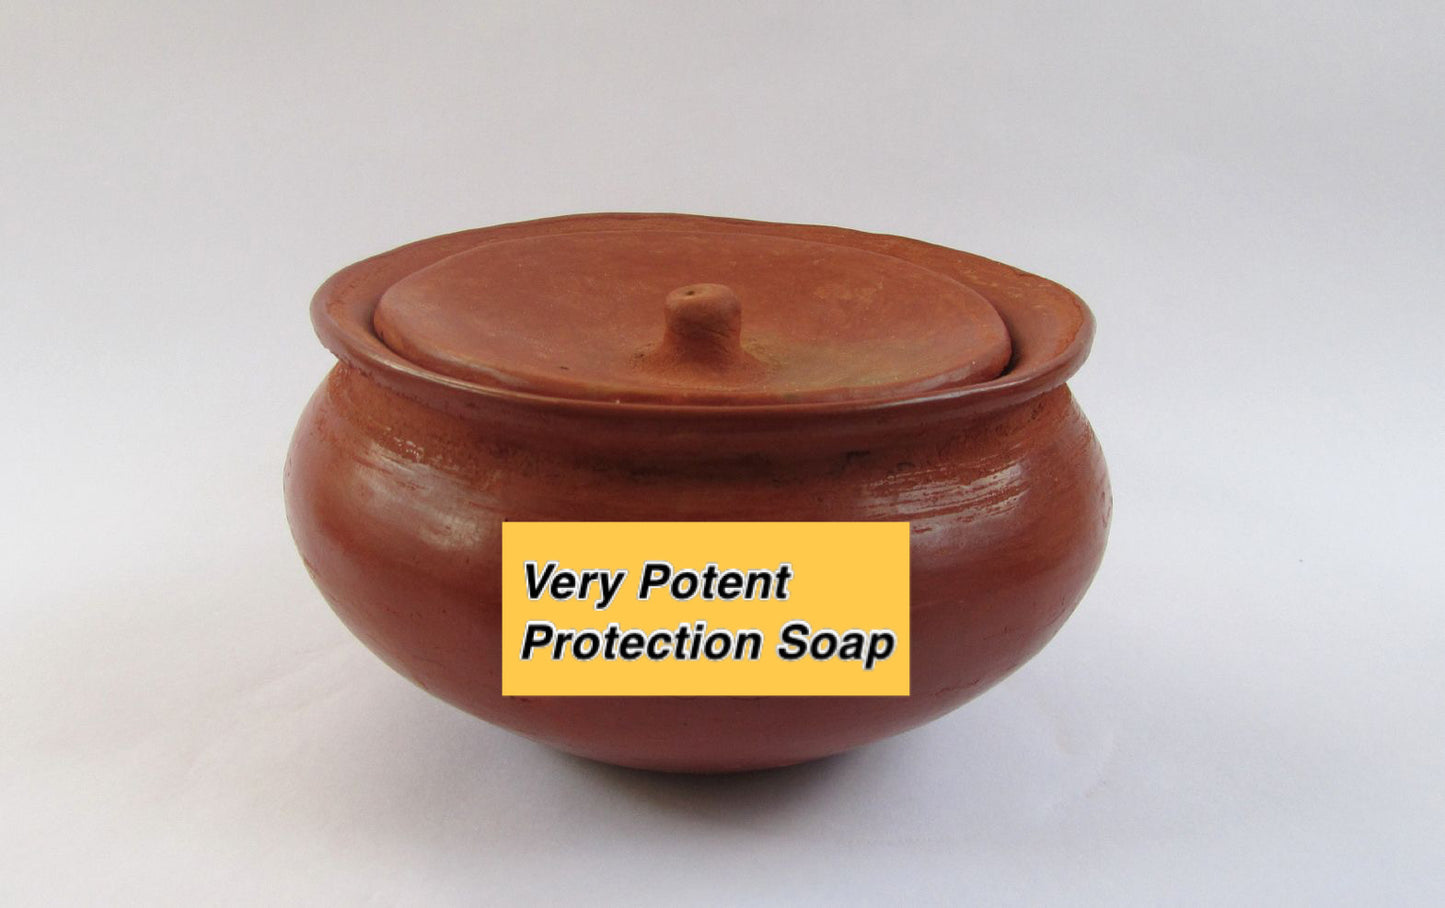 Very Potent Protection Soap